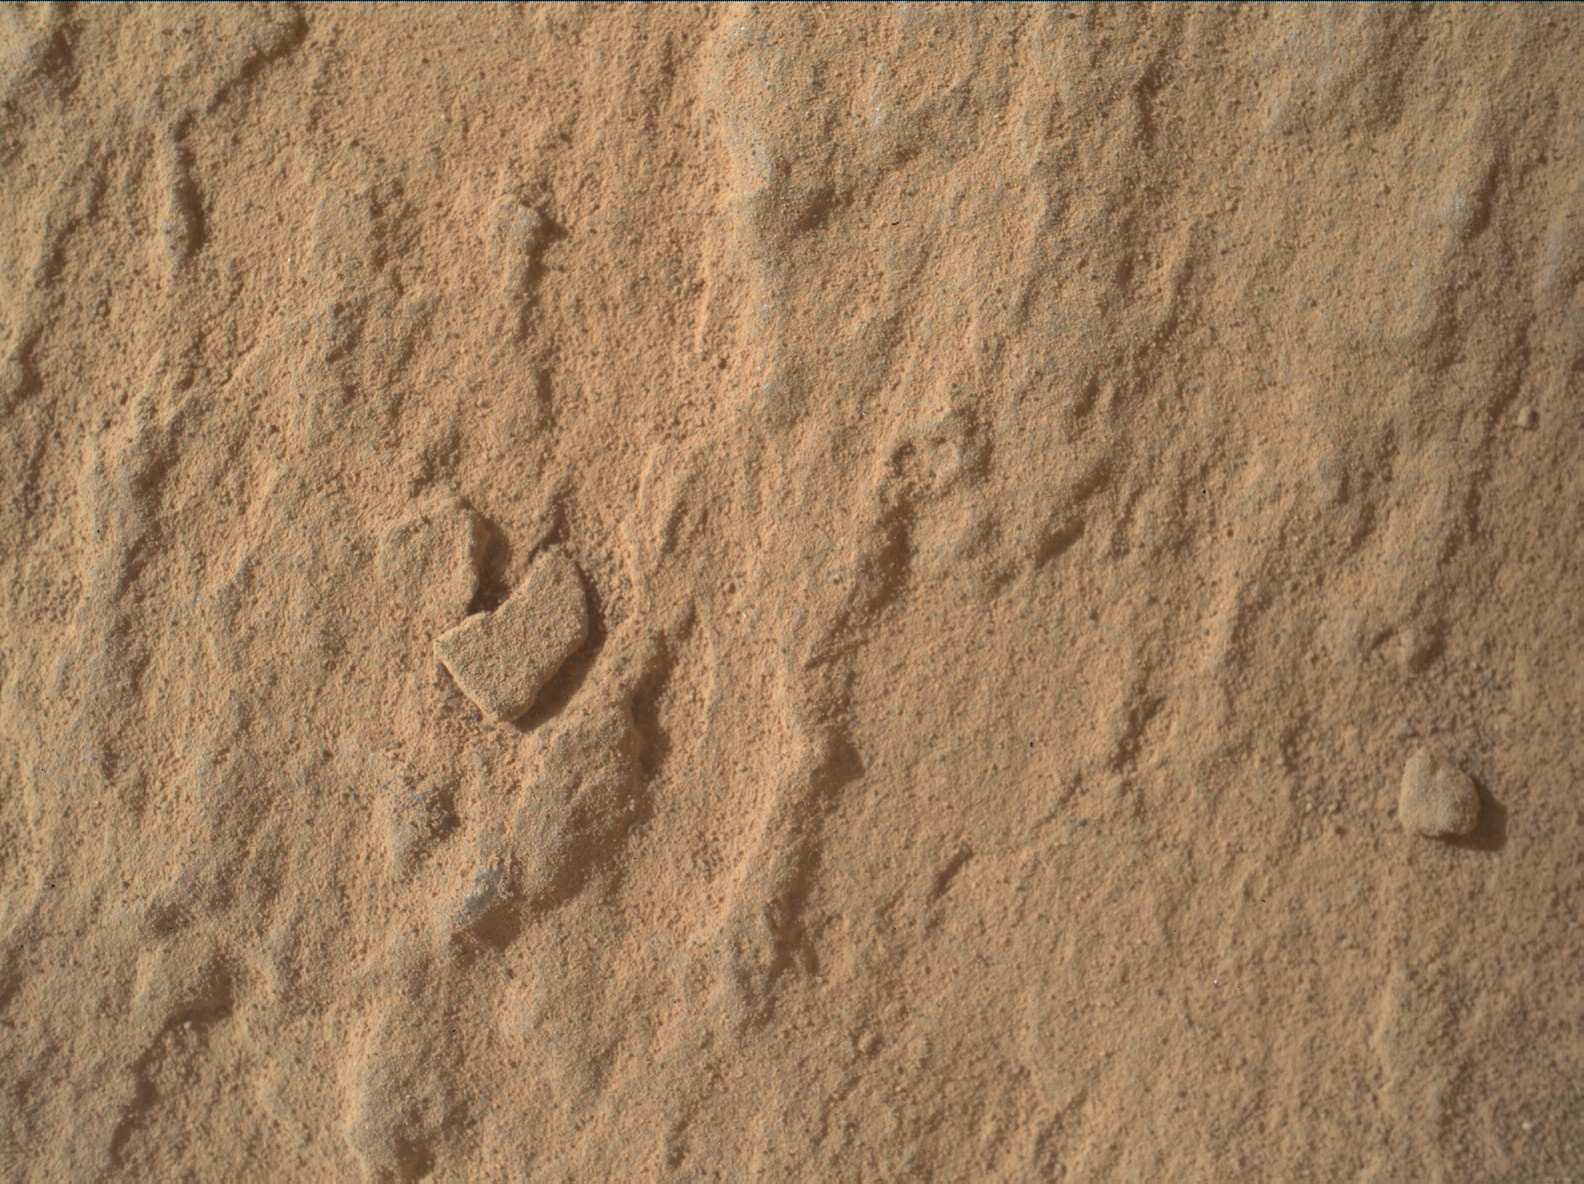 Nasa's Mars rover Curiosity acquired this image using its Mars Hand Lens Imager (MAHLI) on Sol 3723